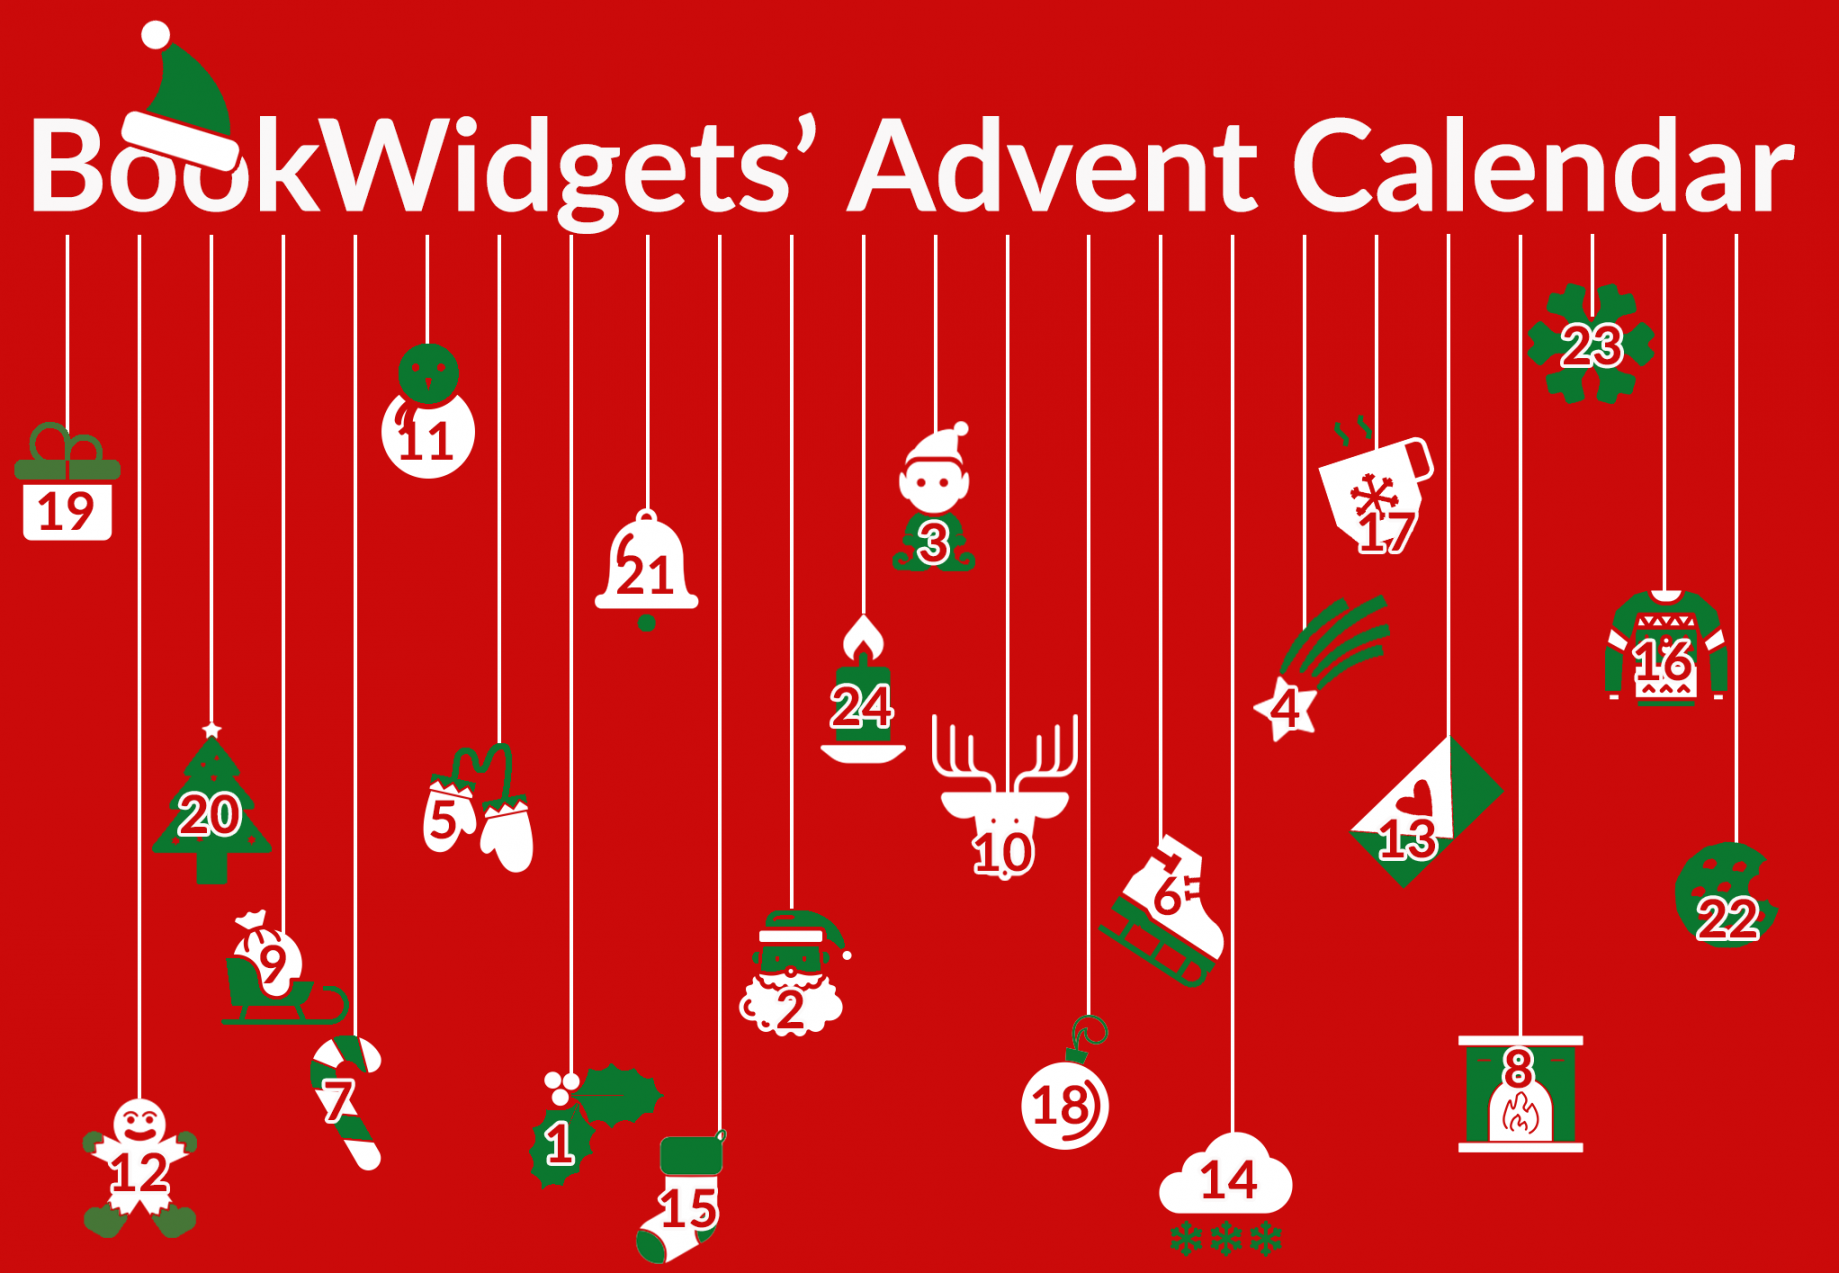 Interactive Classroom Advent Calendar: Counting down to Christmas